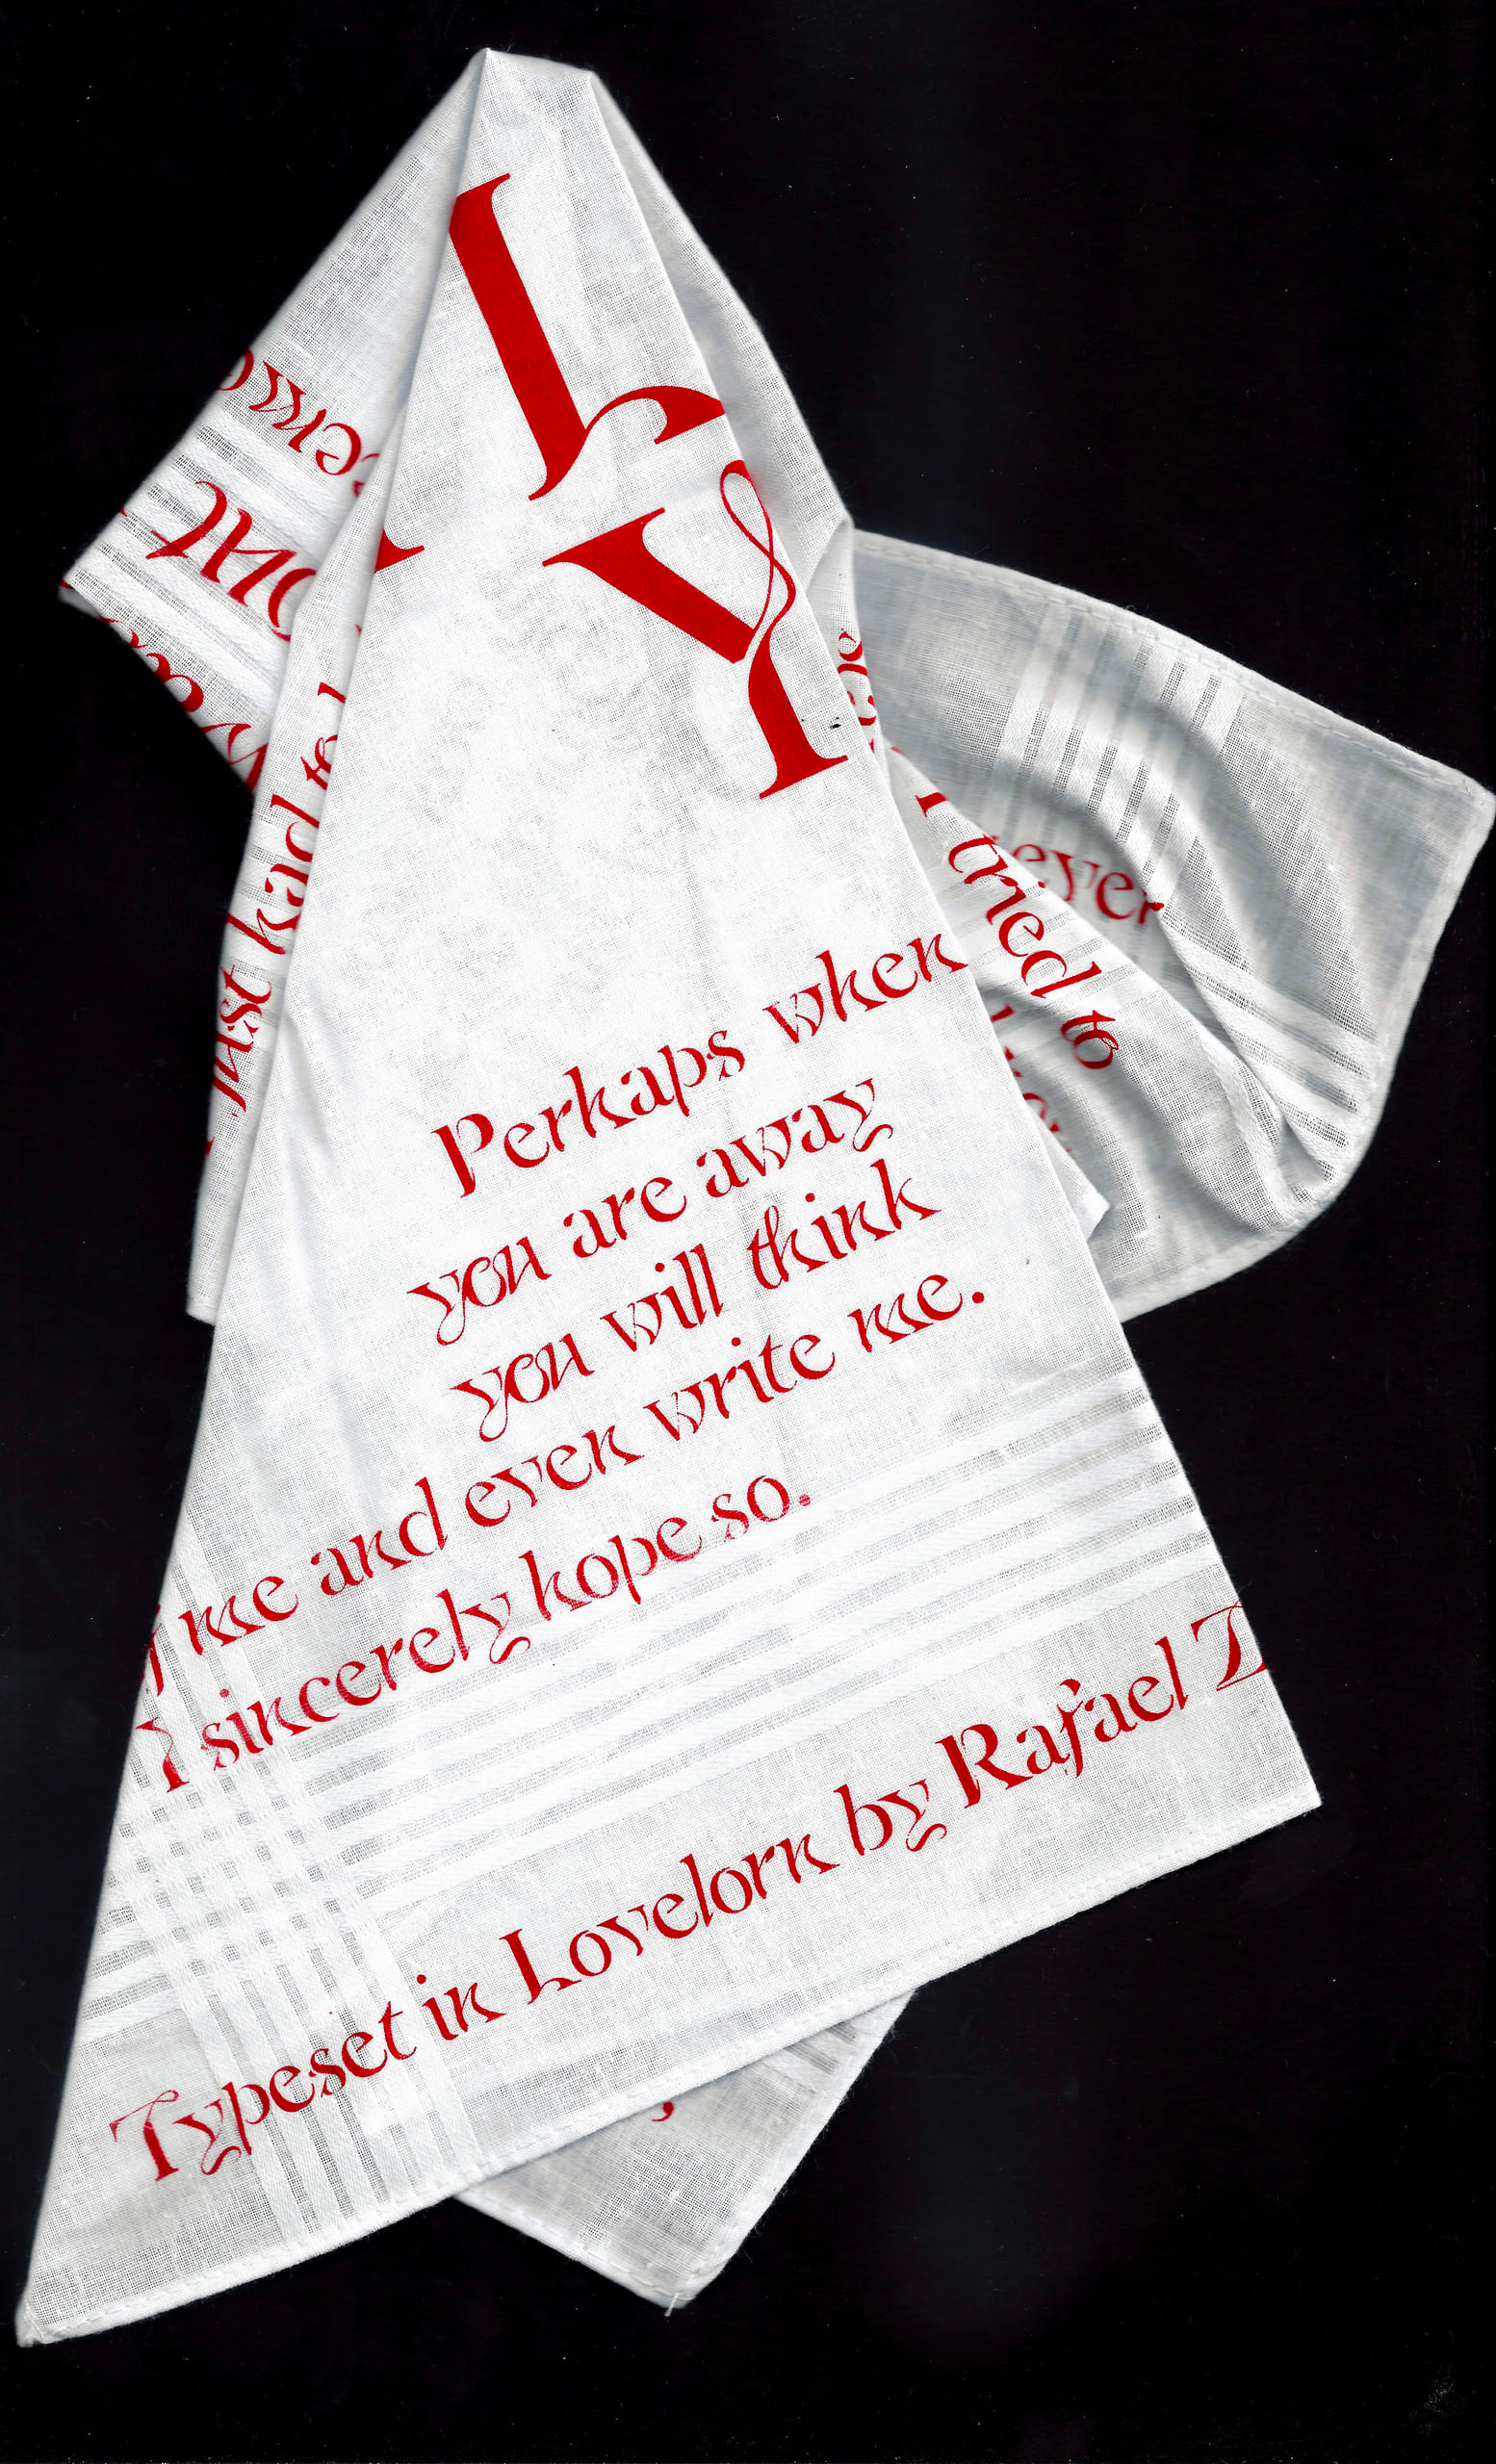 Photograph of a white cotton handkerchief covered in writing in a red font and partially folded, on a black background.